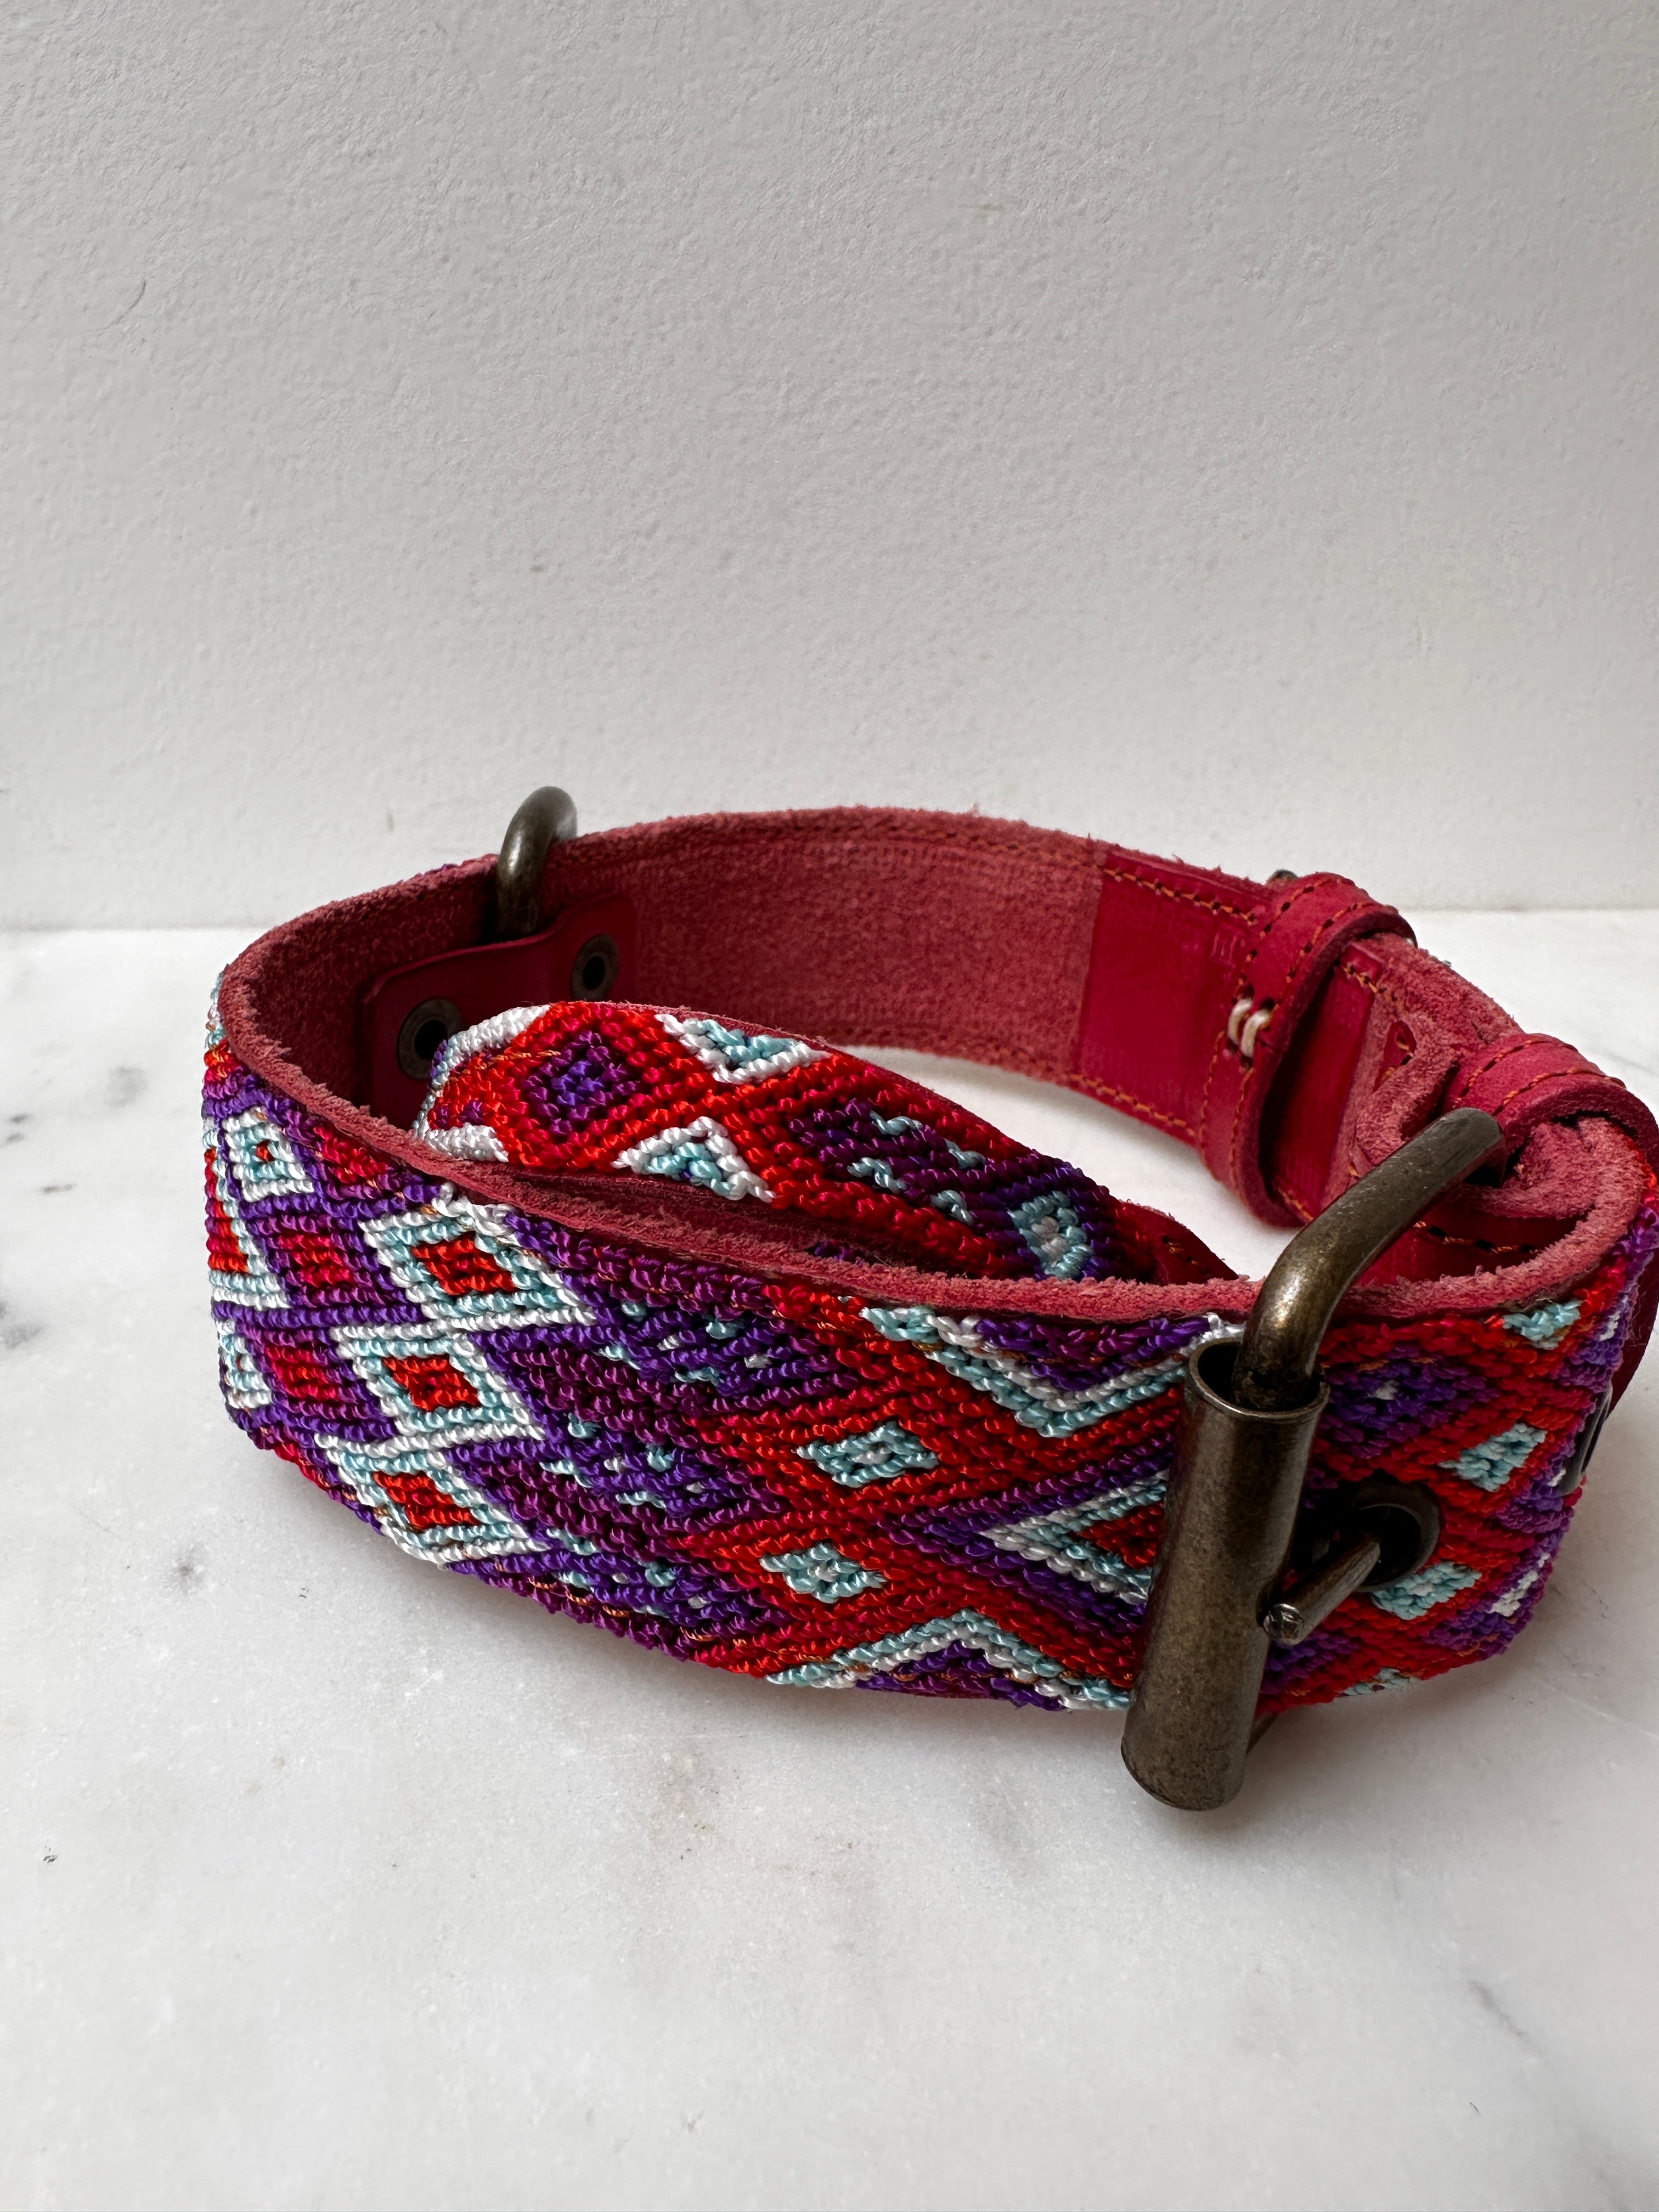 Future Nomads Homewares One Size Huichol Embroidered Wide Dog Collar M5